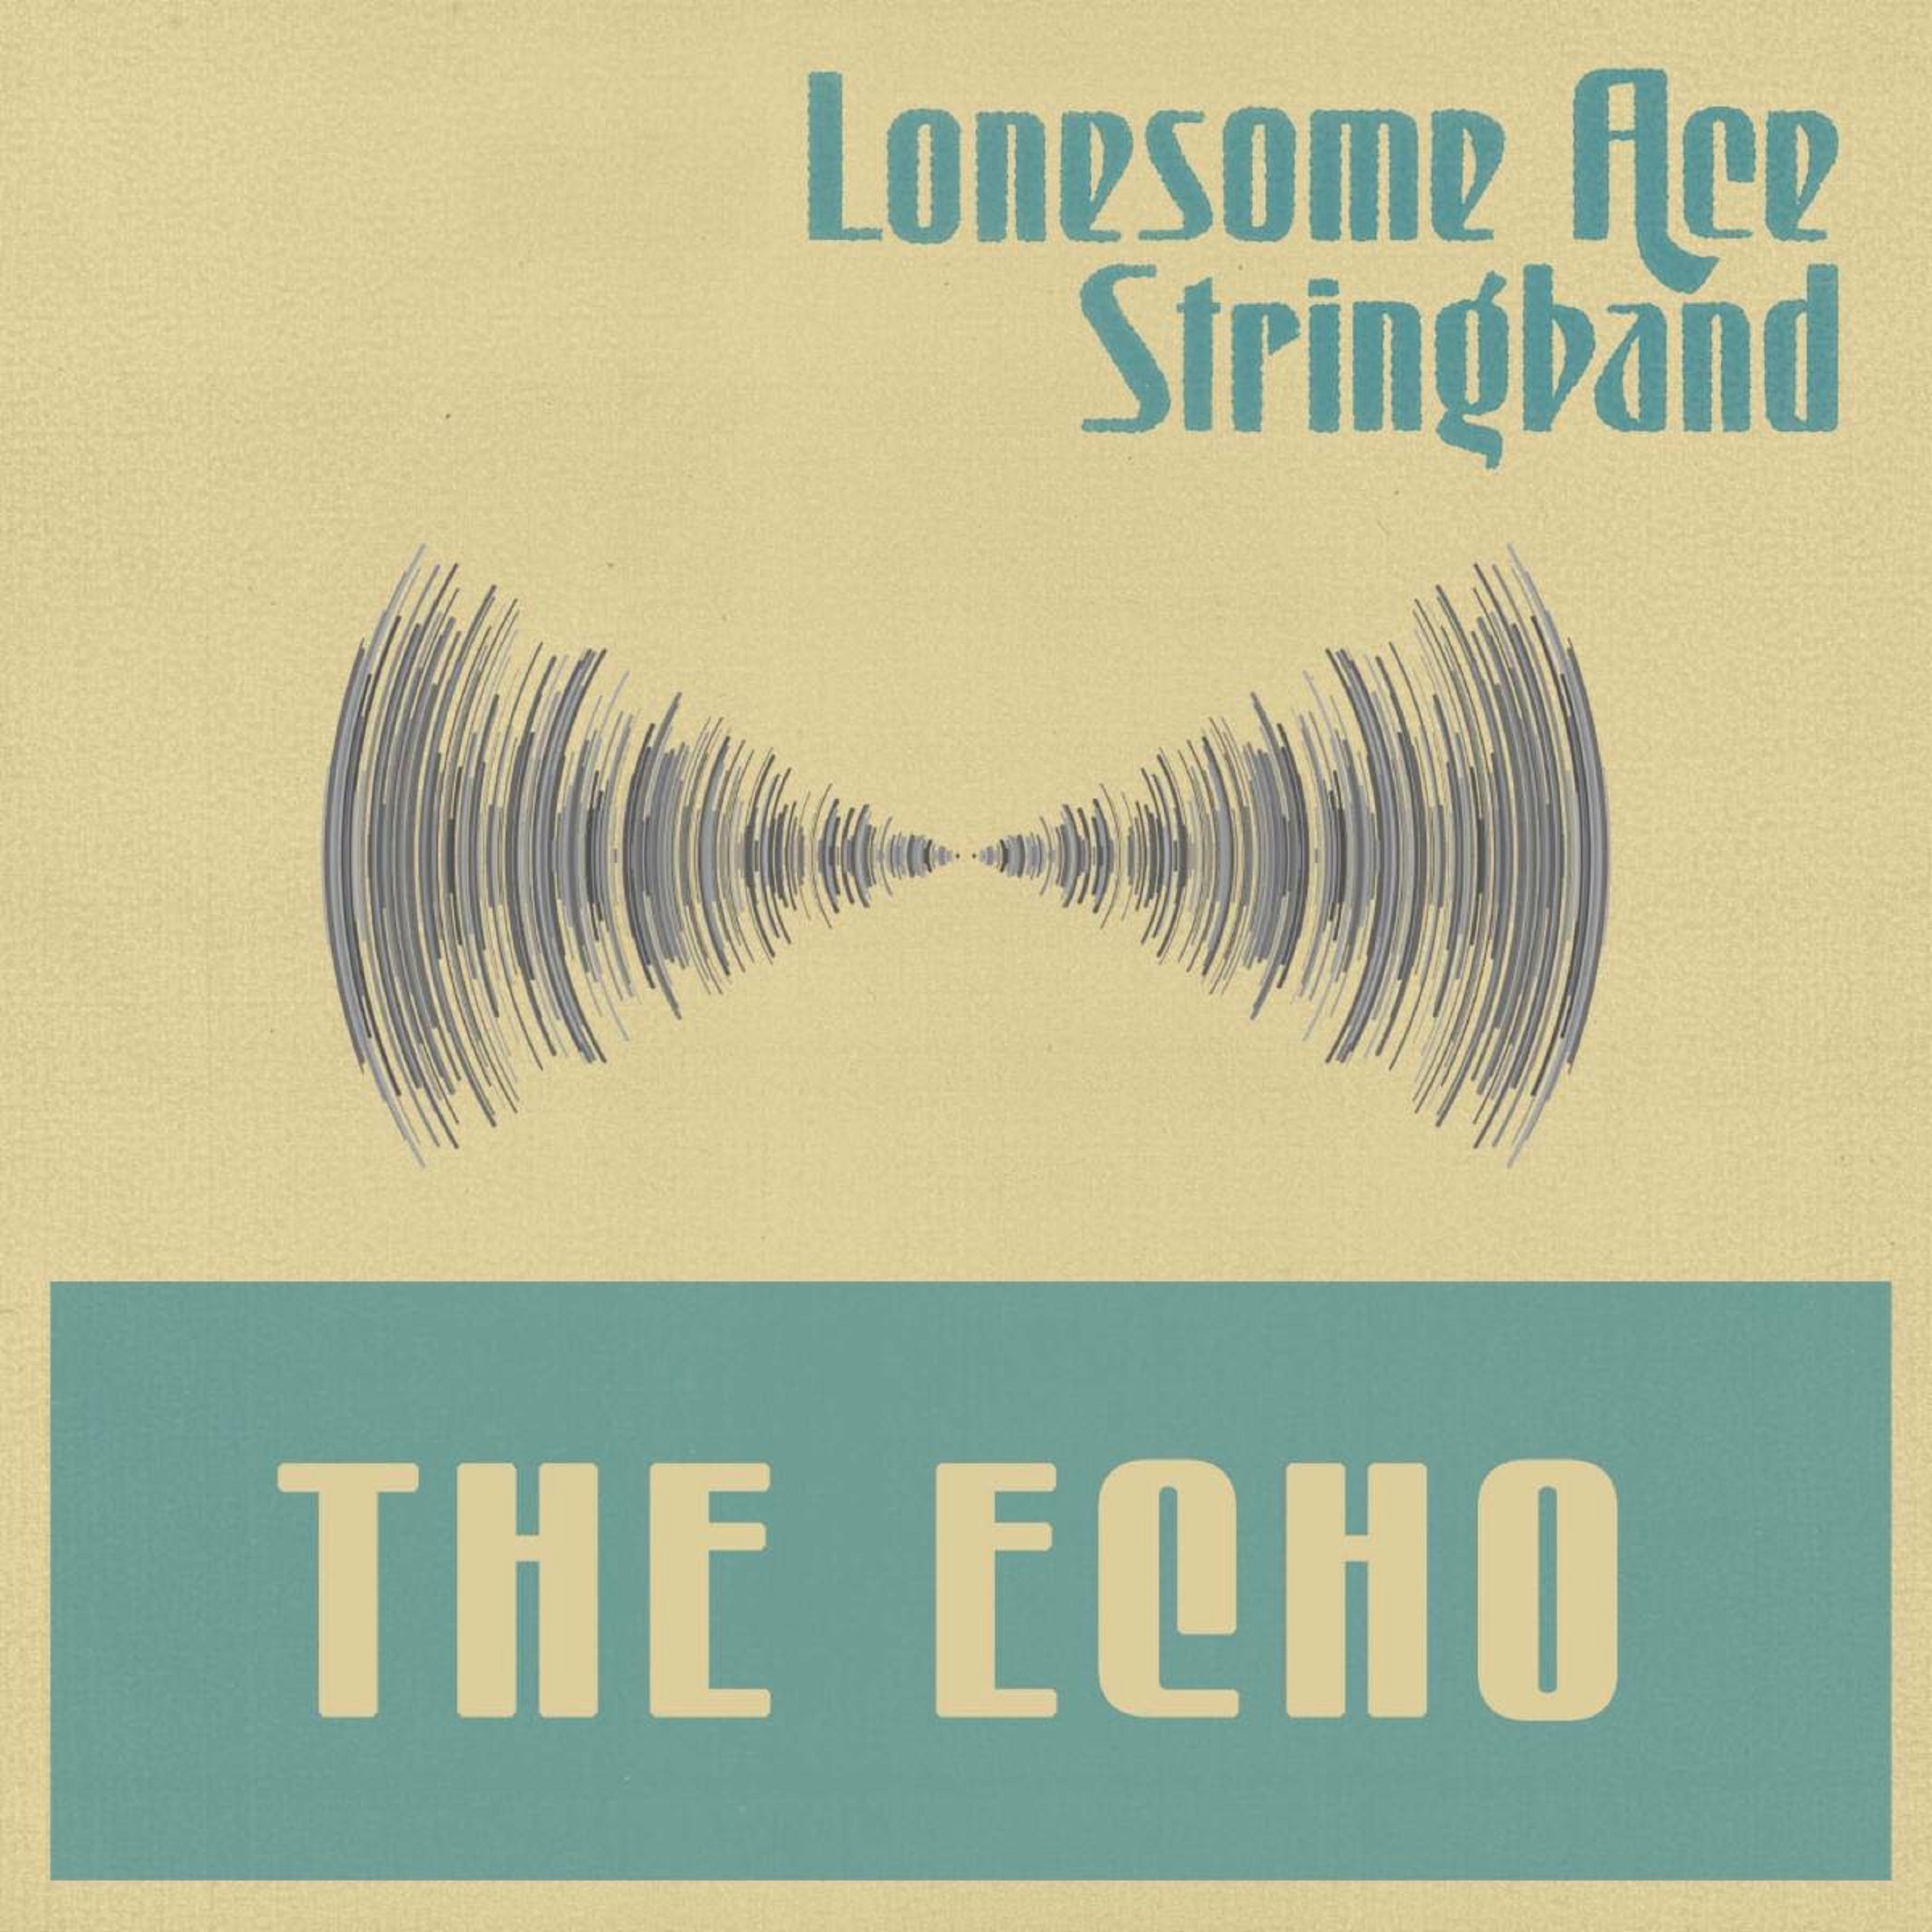 Lonesome Ace Stringband Remind Us That Nobody Is Immune To “The Echo”